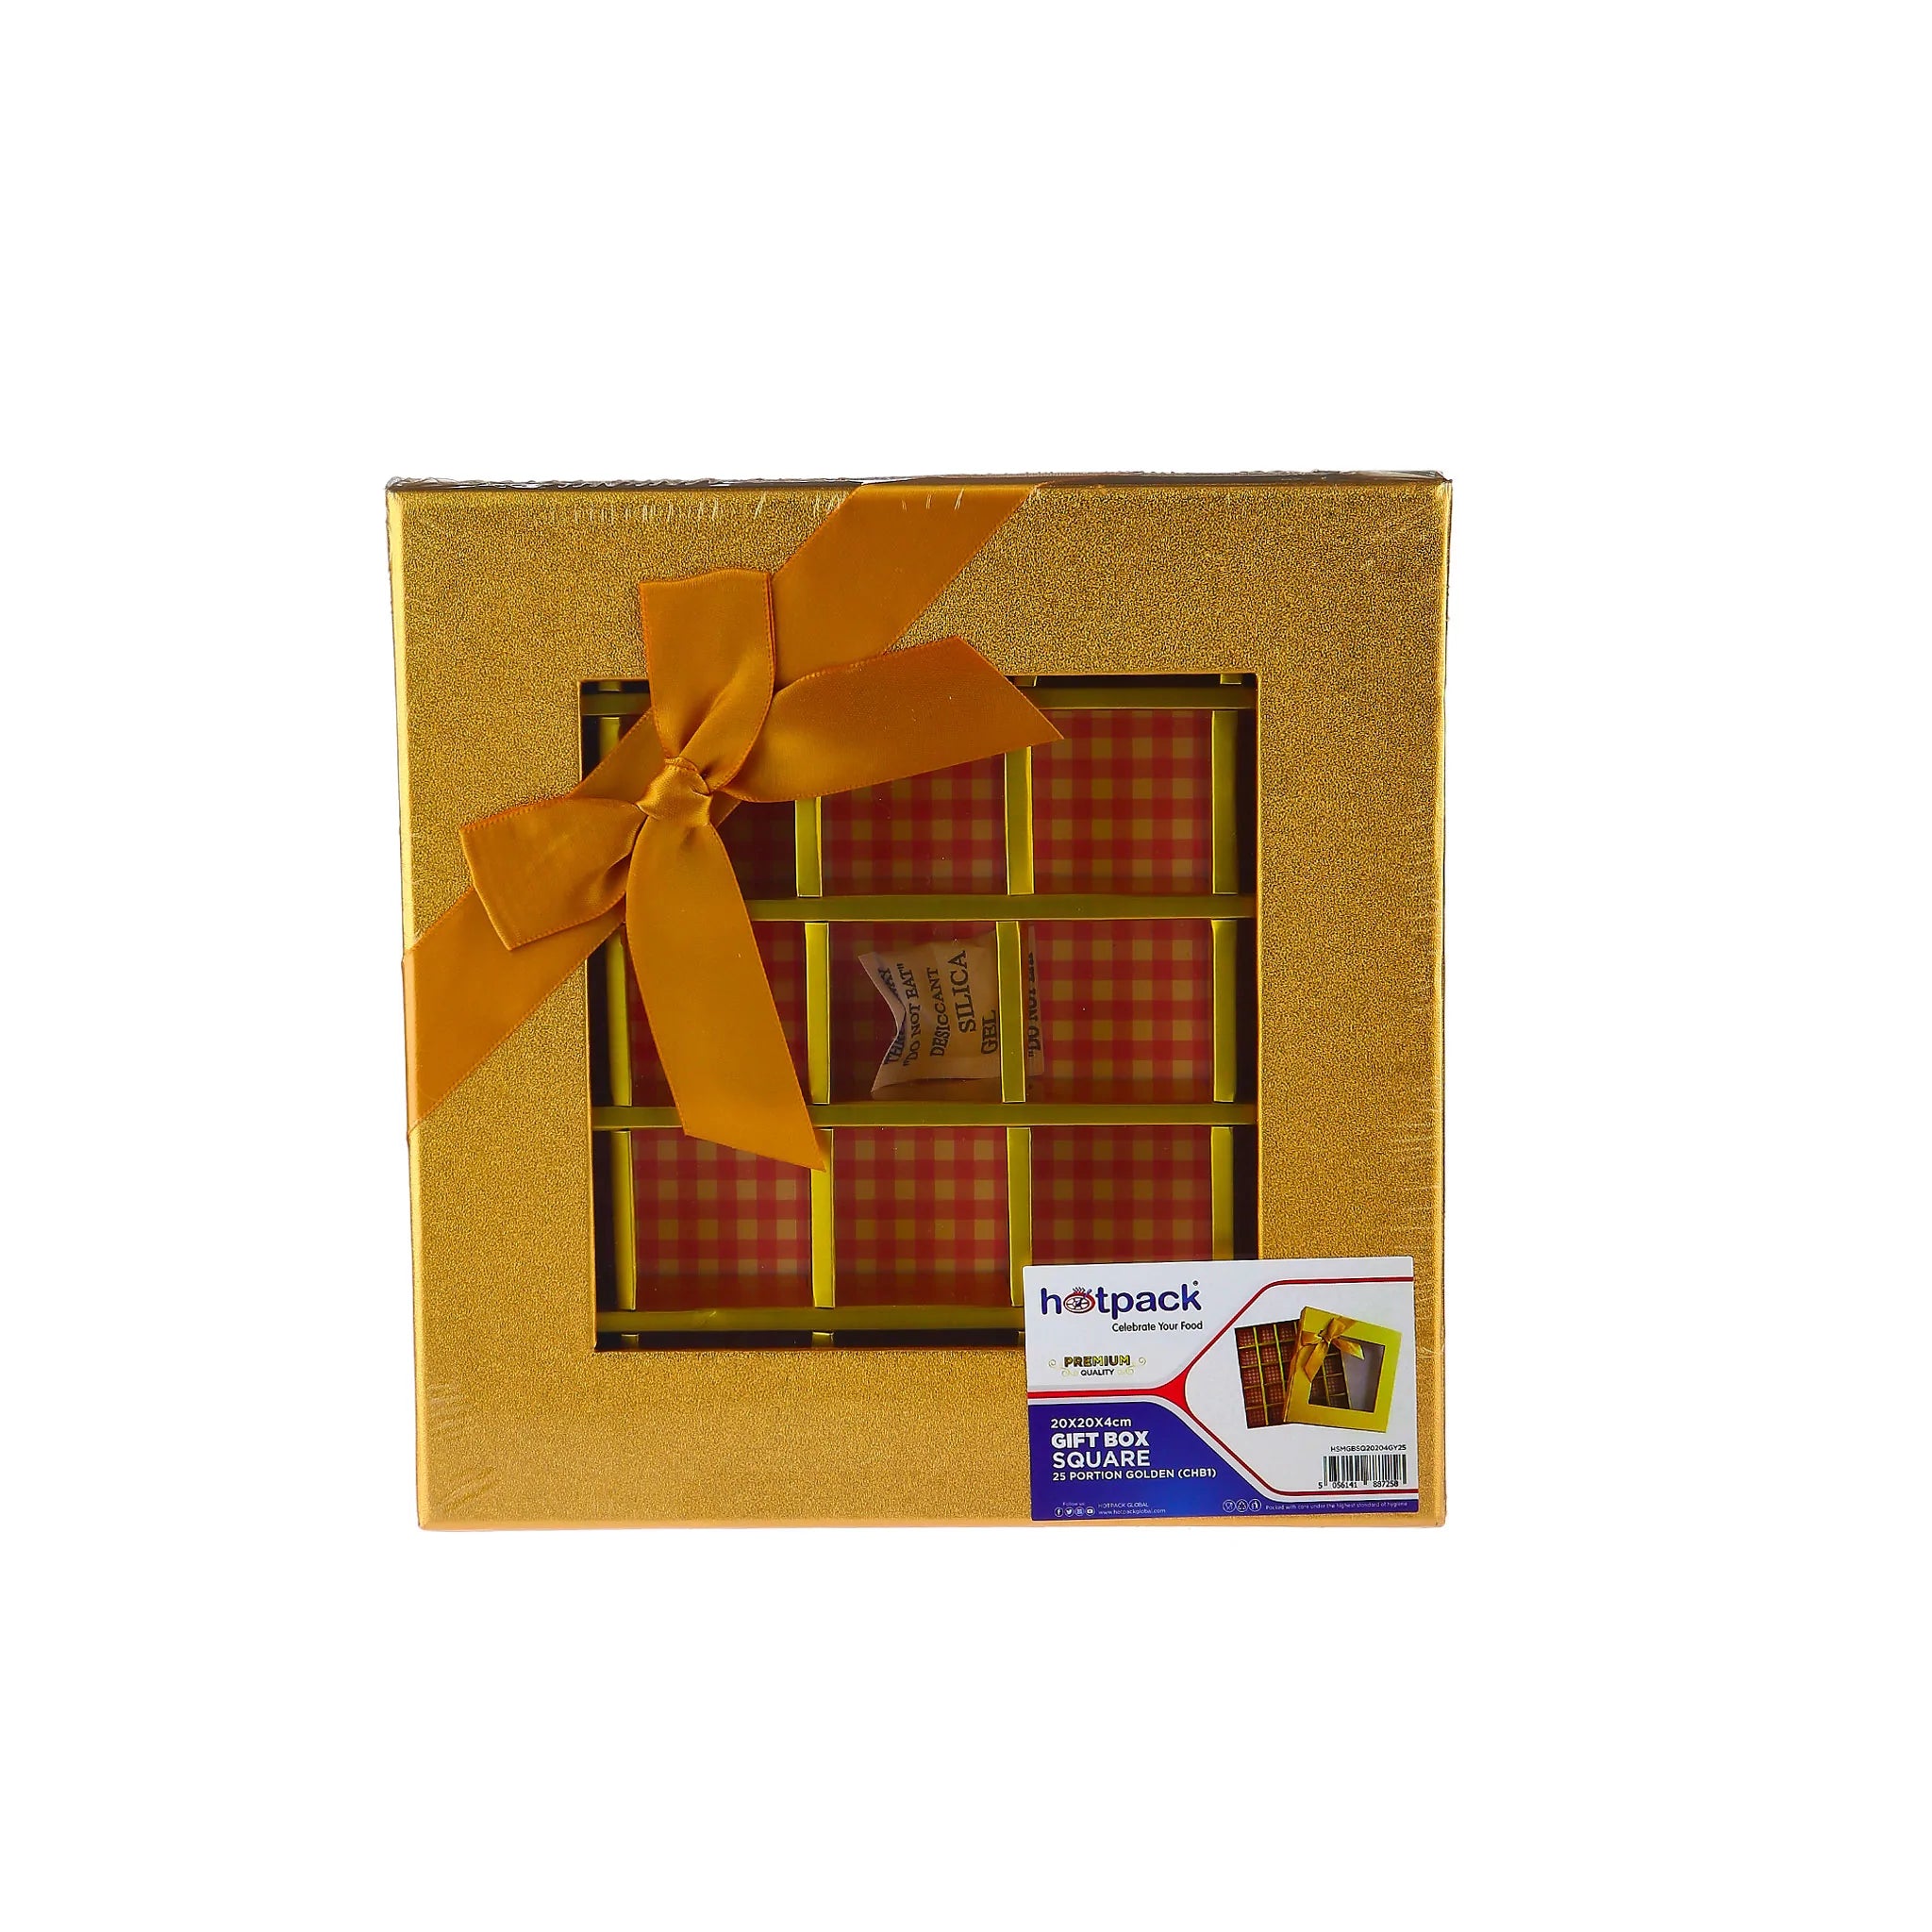 48 Pieces Square Golden Yellow Chocolate Gift Box Shape 16 Division -17*17*4 cm